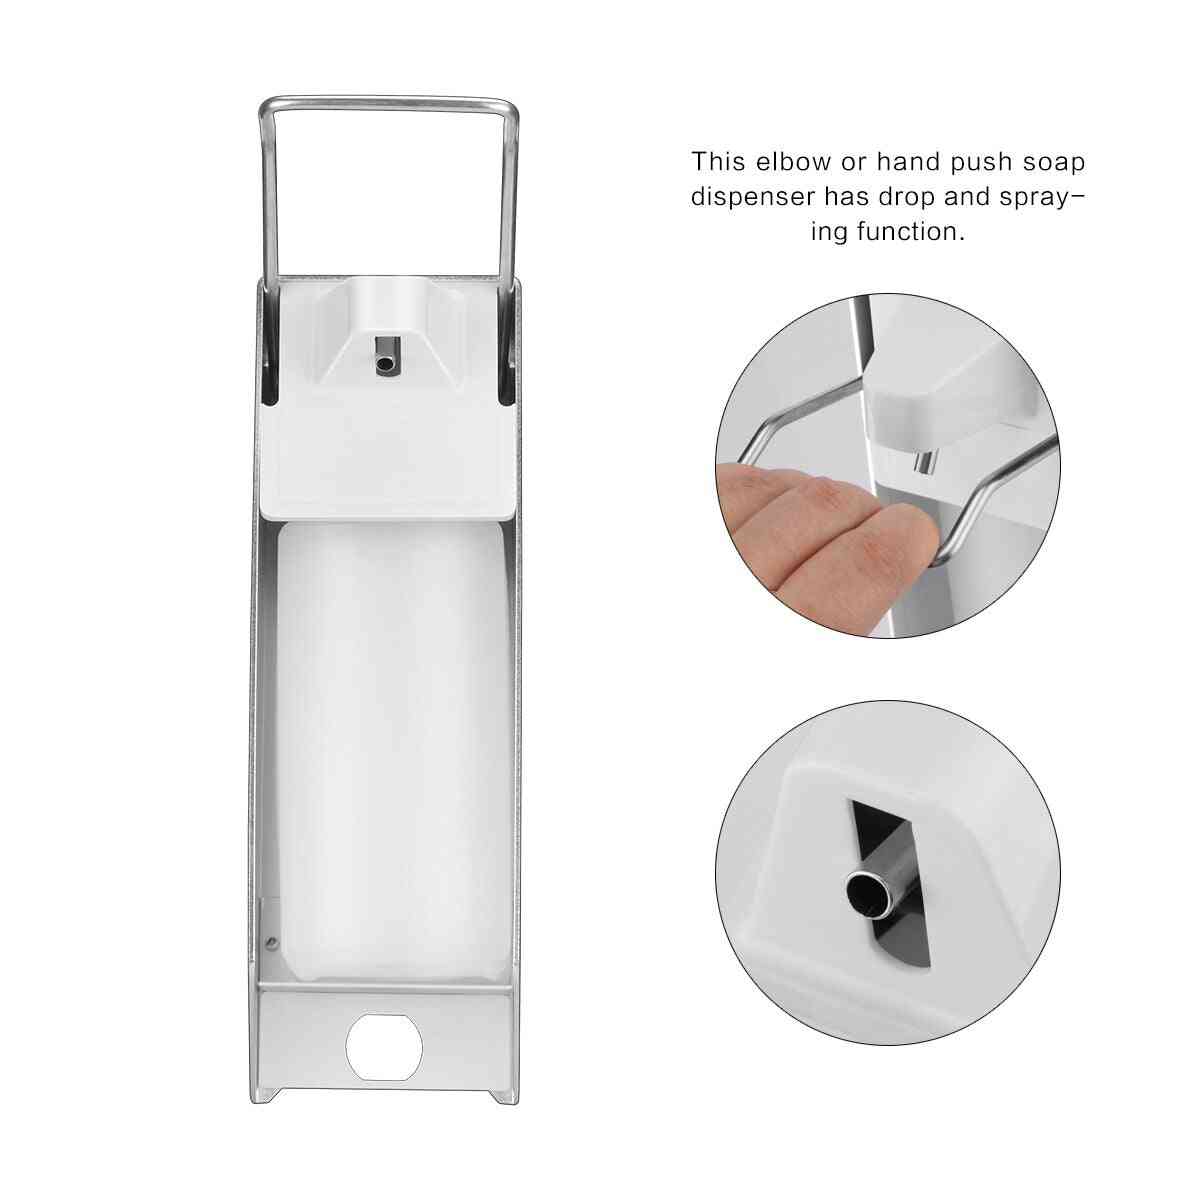 Wall Mount Soap, Sanitizer, Lotion Dispenser With Manual Pump For Bathrooms And Hospitals